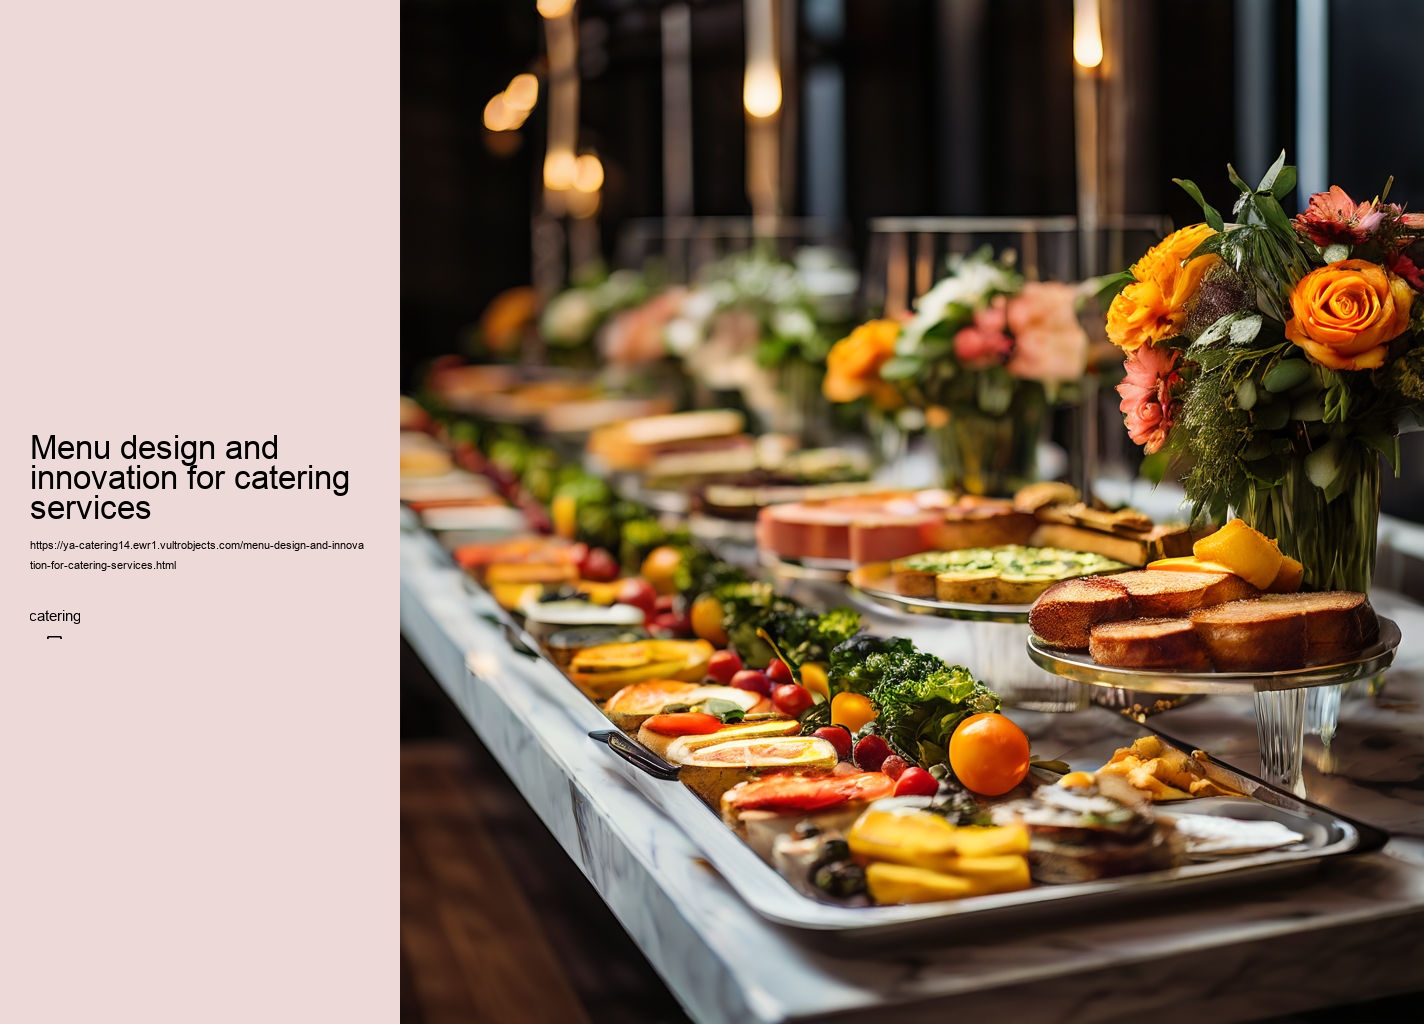 Menu design and innovation for catering services